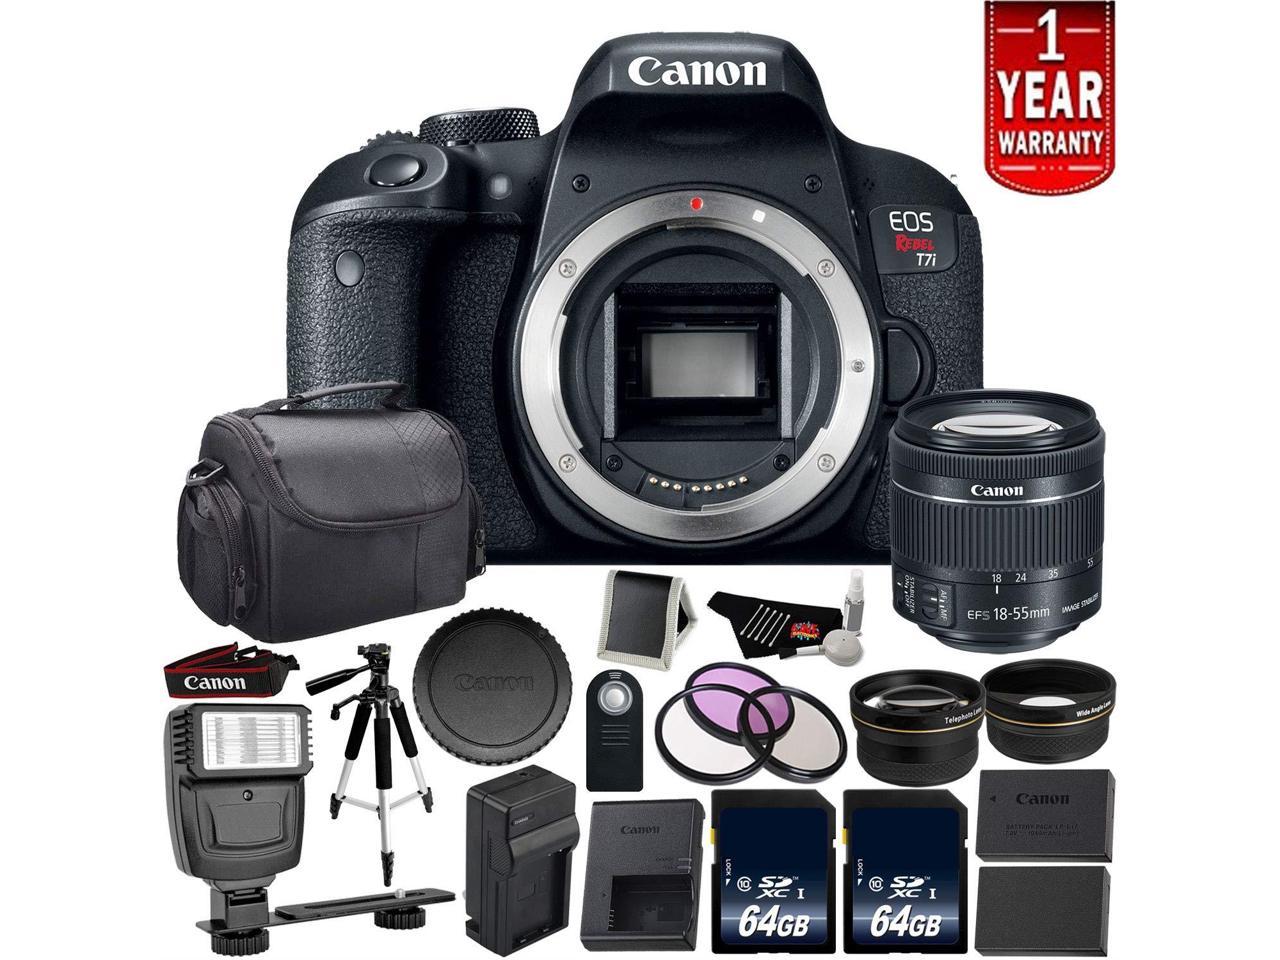 Canon EOS Rebel T7i Digital SLR Camera with 18-55mm Lens - Bundle with 2x 64GB Memory Cards + 1x 64GB Memory Card + Spare Battery + More (Intl Model)